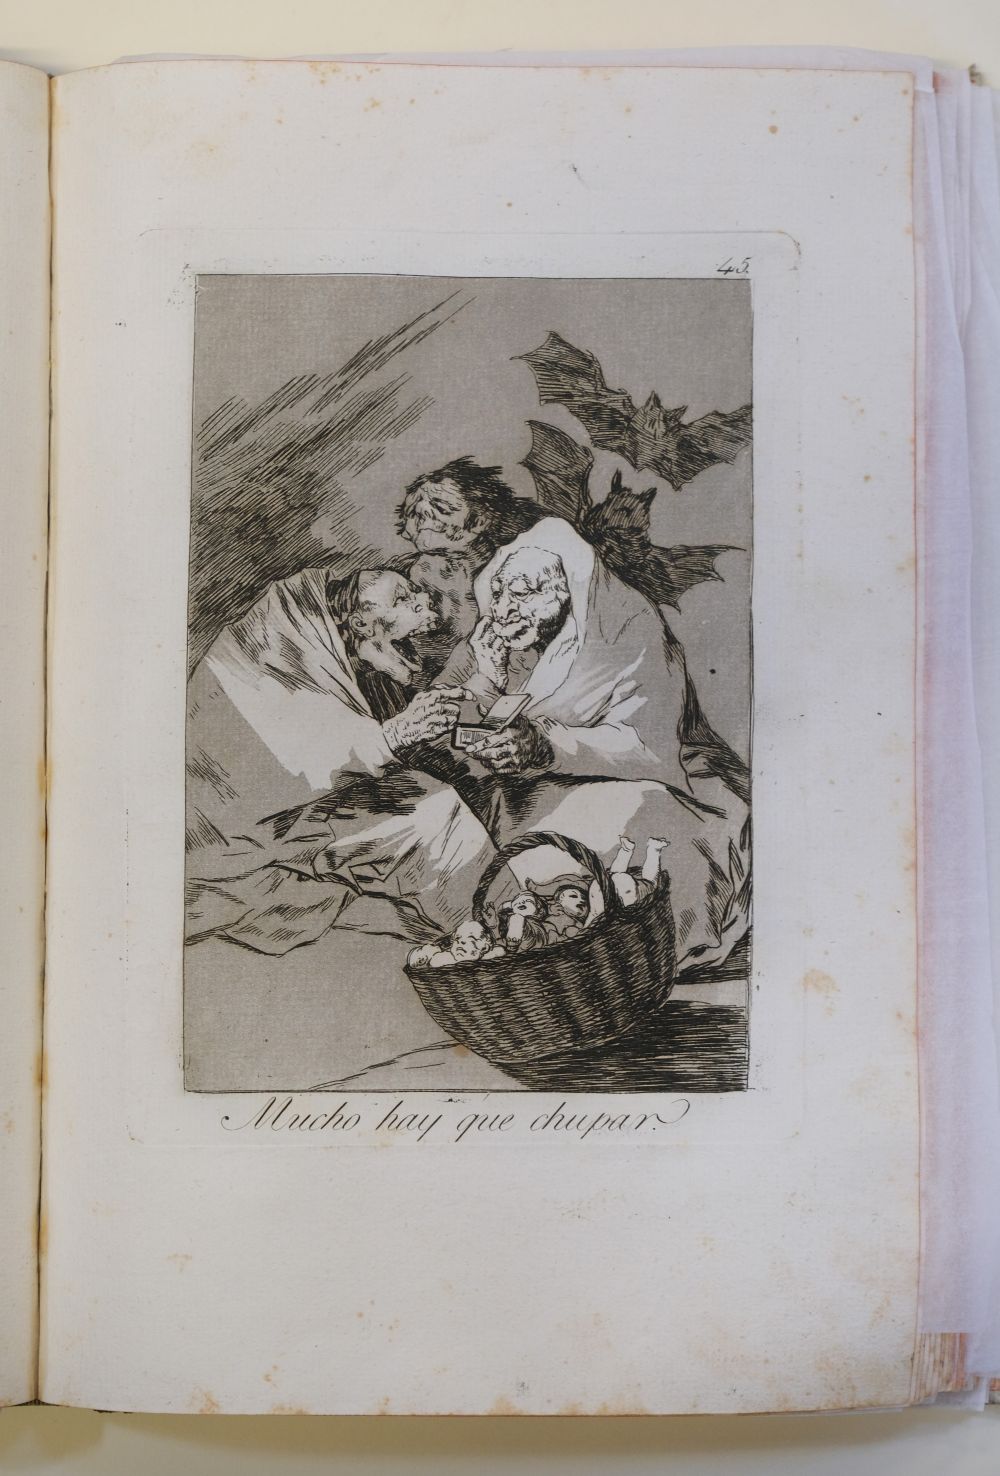 Goya (Francisco de, 1746-1828) Los Caprichos, 1799, the complete set of 80 etchings, FIRST EDITION - Image 31 of 37